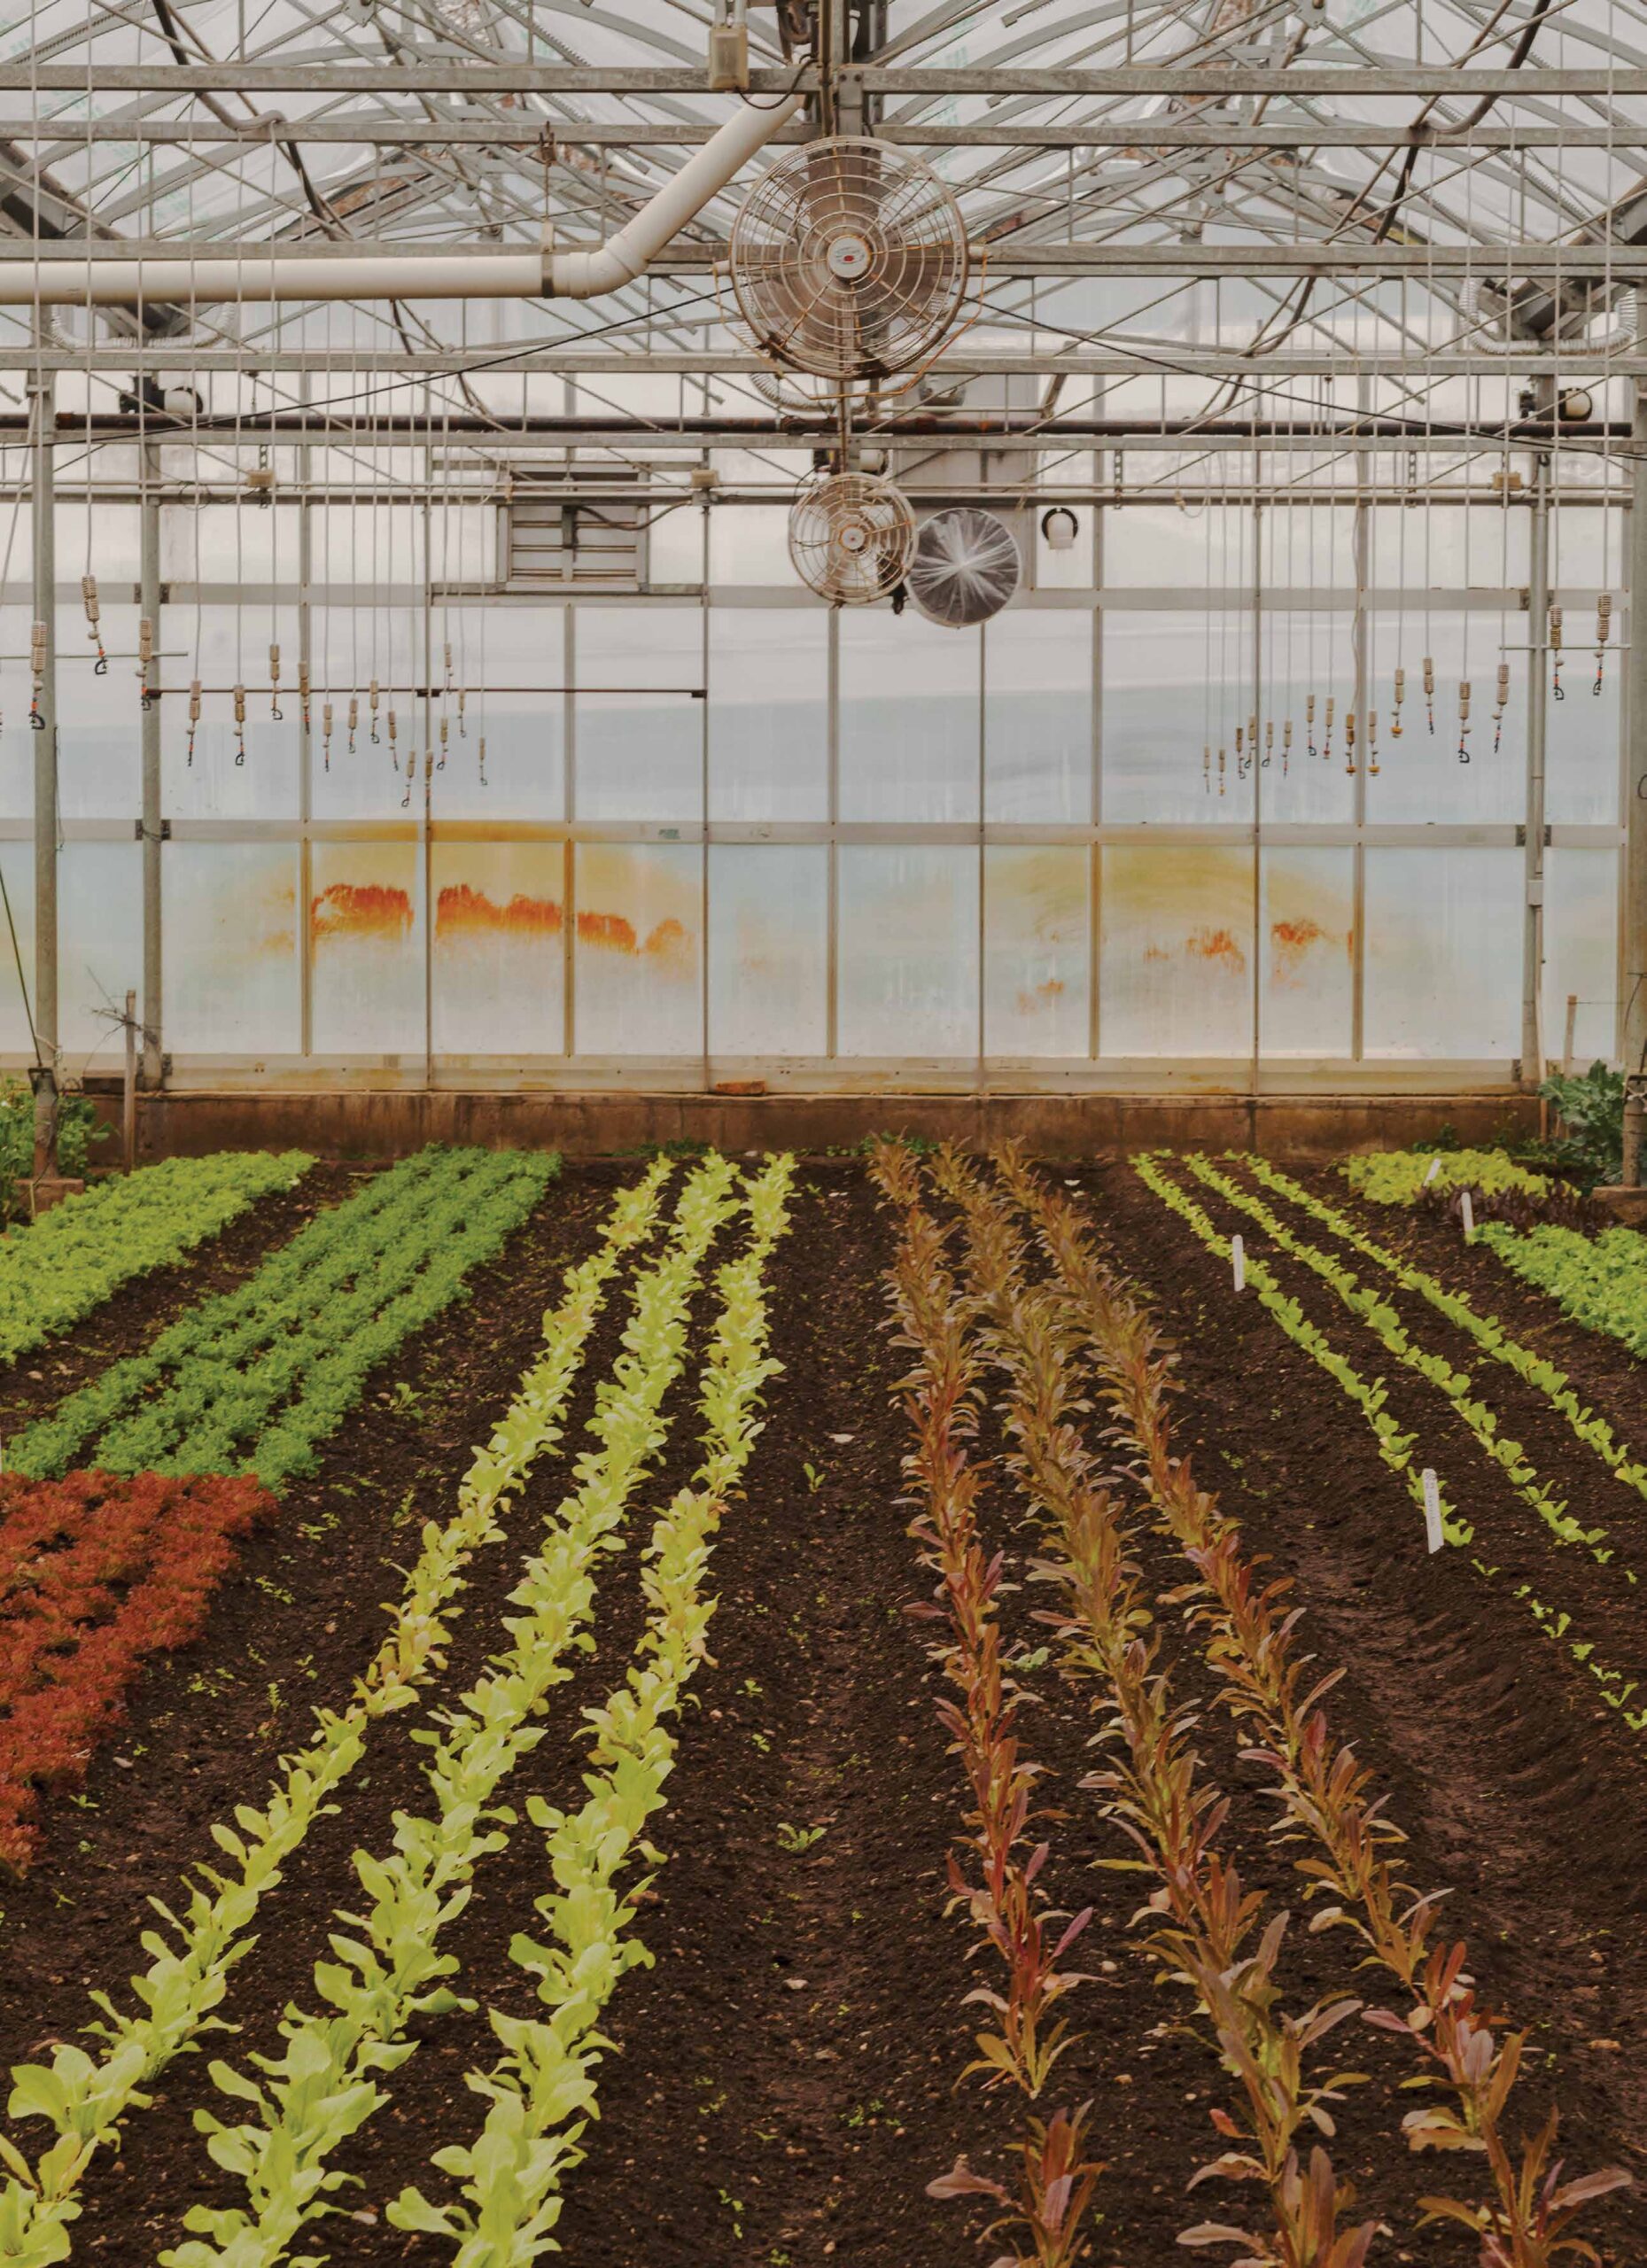 Photo of a greenhouse with different coloured crops growing.